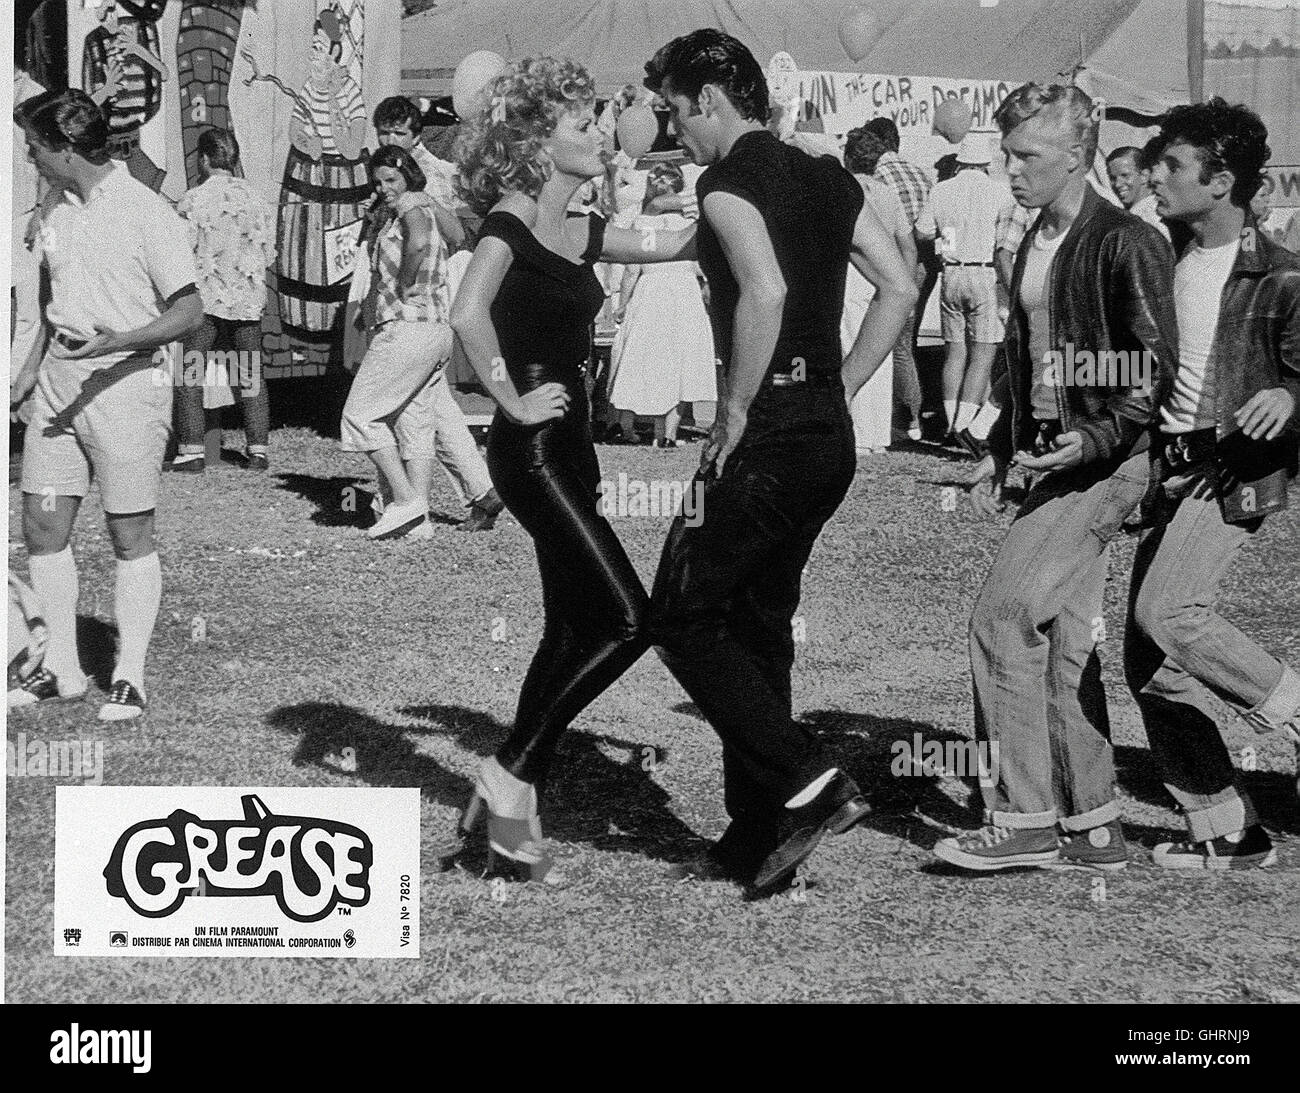 Grease movie Black and White Stock Photos & Images - Alamy